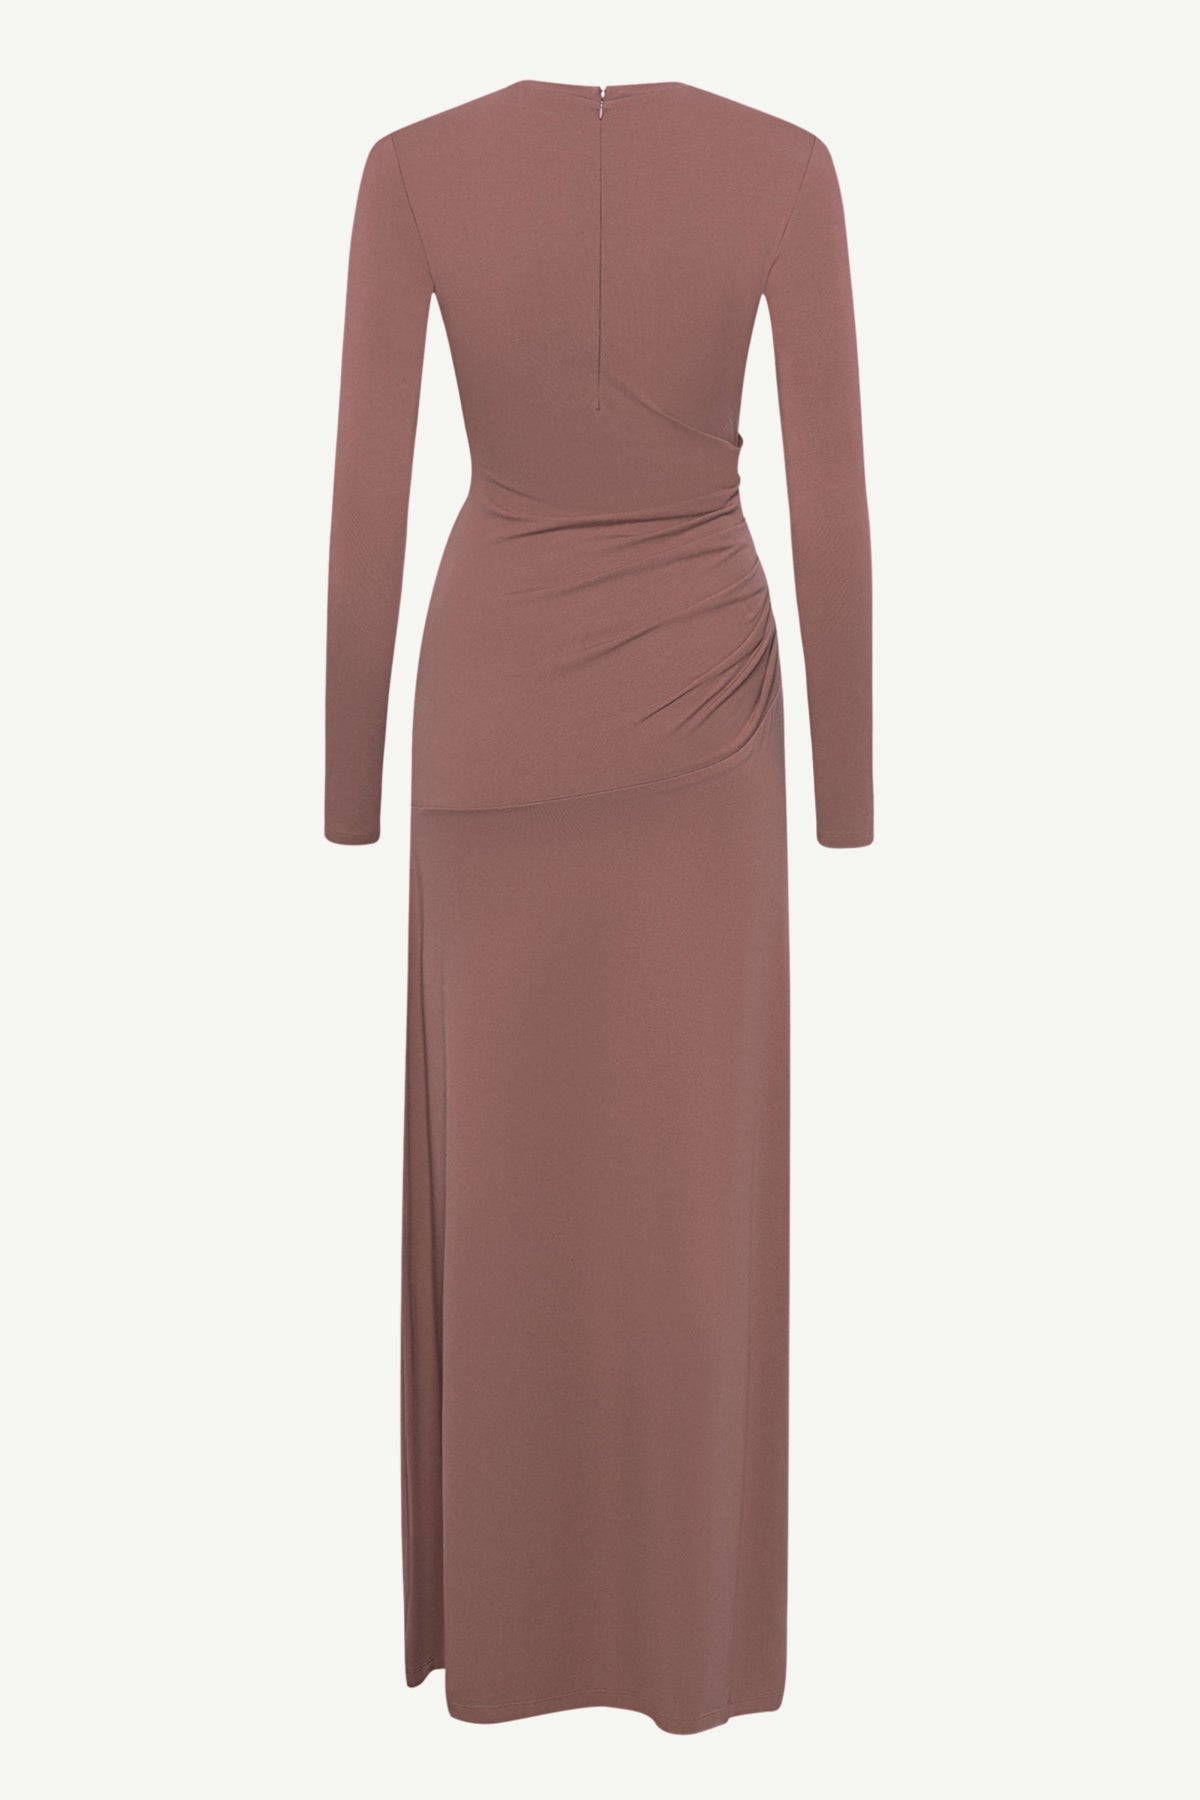 Natalie Rouched Jersey Maxi Dress - Deep Taupe Clothing epschoolboard 